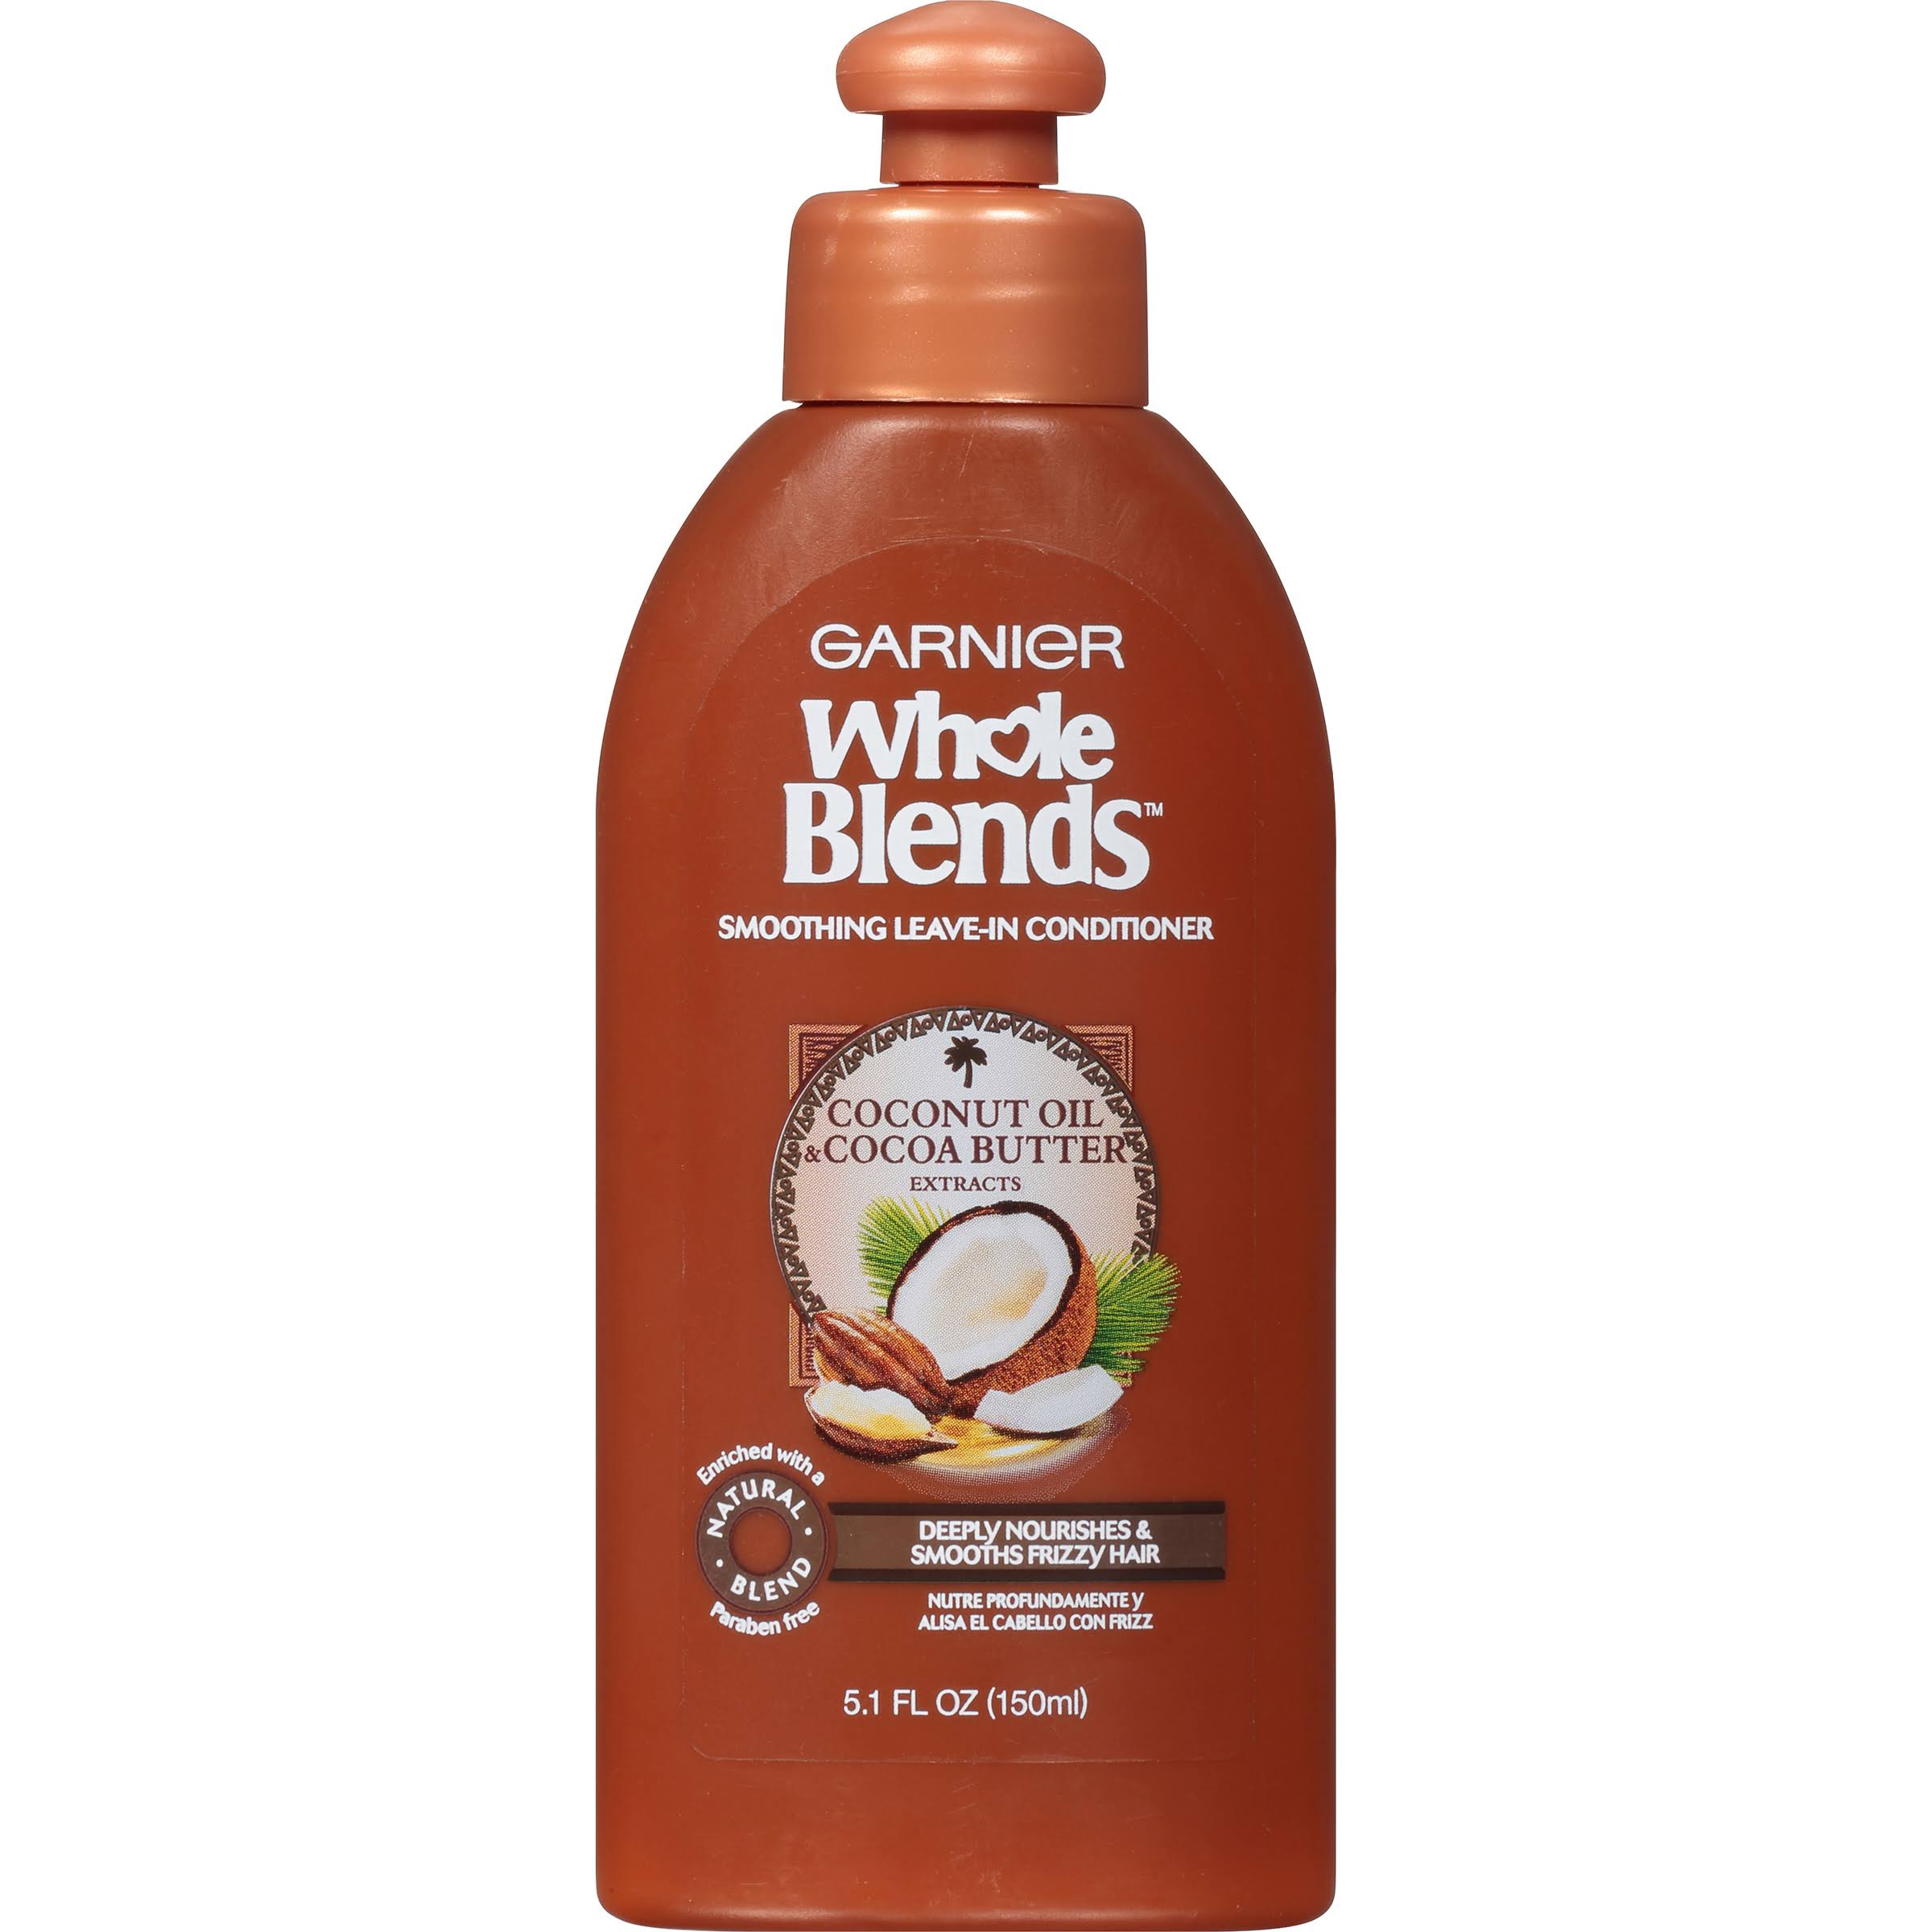 Garnier Whole Blends Smoothing Leave in Conditioner Coconut Oil & Cocoa Butter - 5.1 fl oz